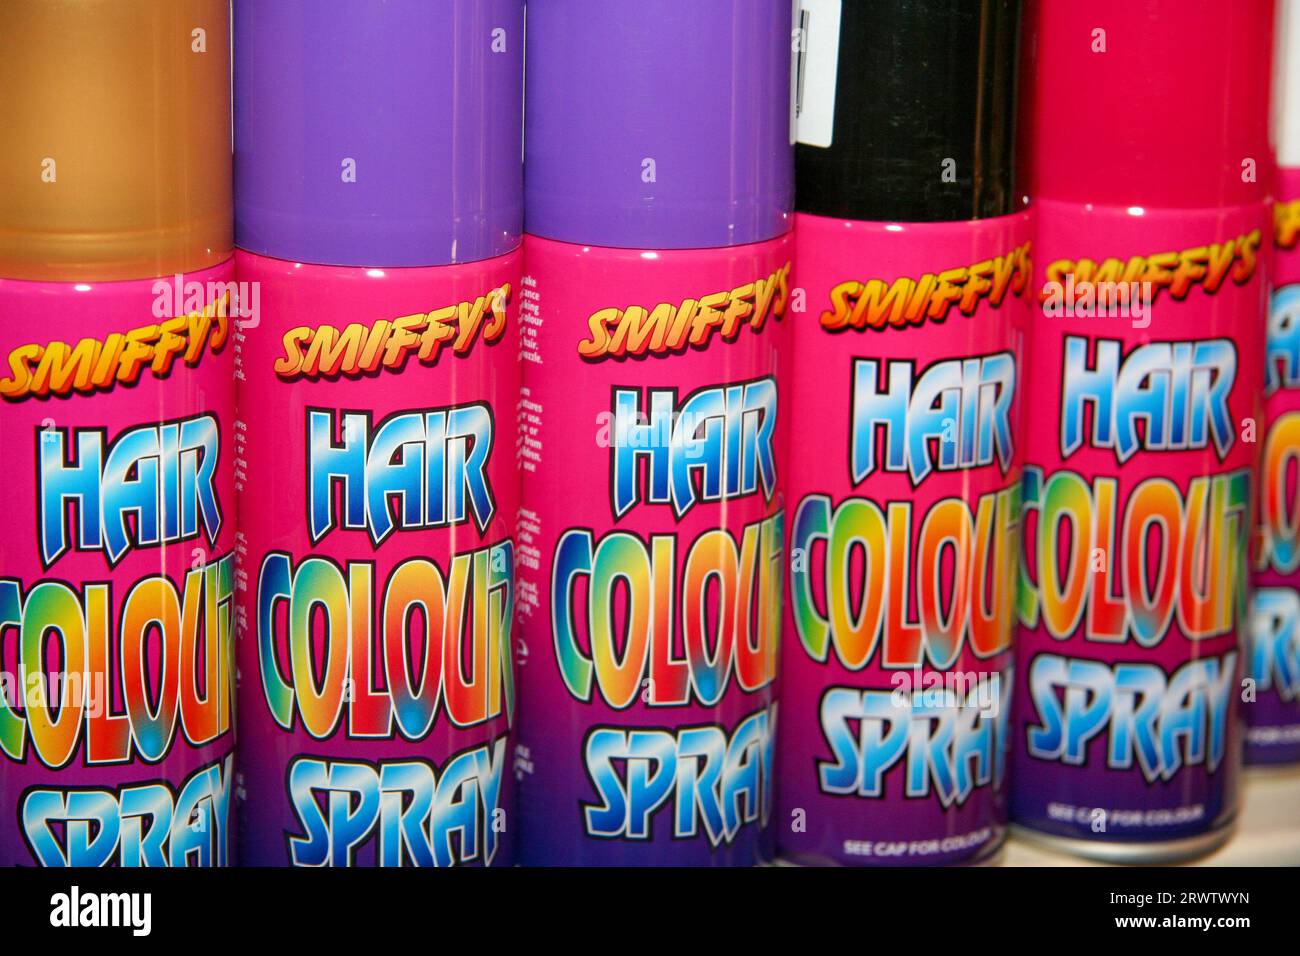 Five cans of Smiffy's brand hair colour spray in a row and for sale in an independent retailers Stock Photo